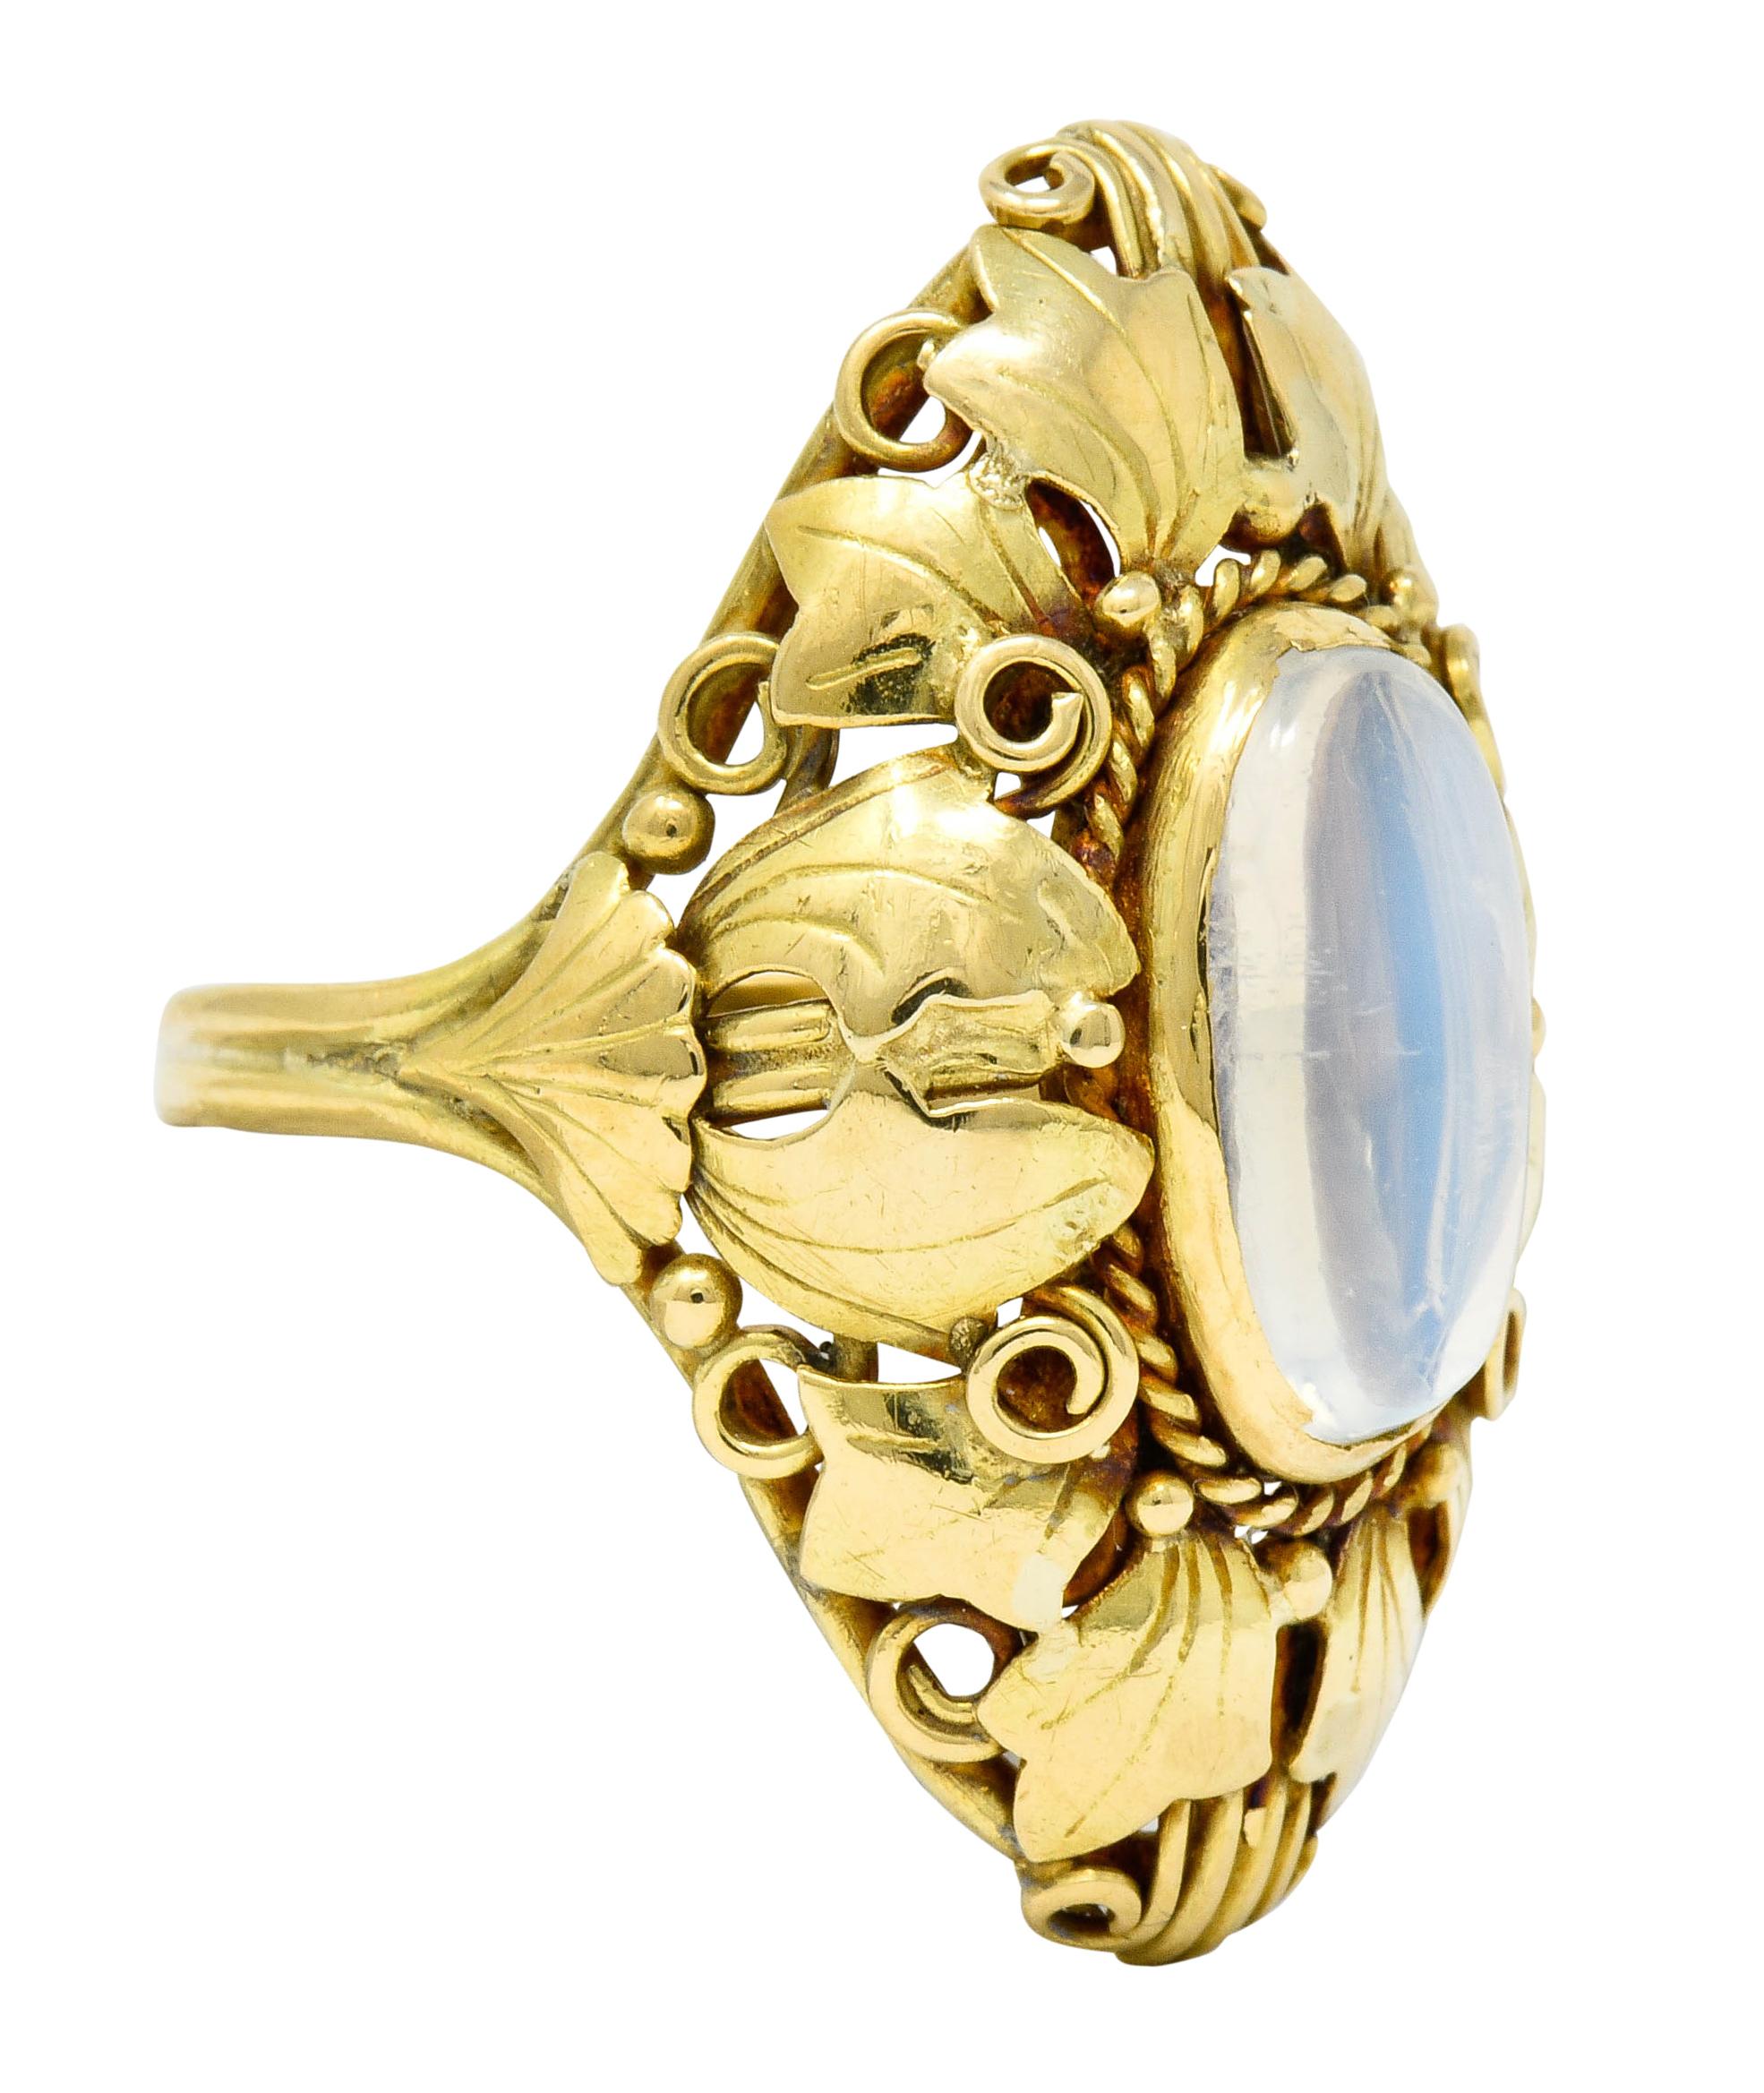 Designed as an elongated navette form comprised of layered ivy and ginkgo leaves

Accented throughout by gold bead and scrolled wire details

Centering an oval moonstone cabochon measuring approximately 12.5 x 6.6 mm, translucent with strong billowy